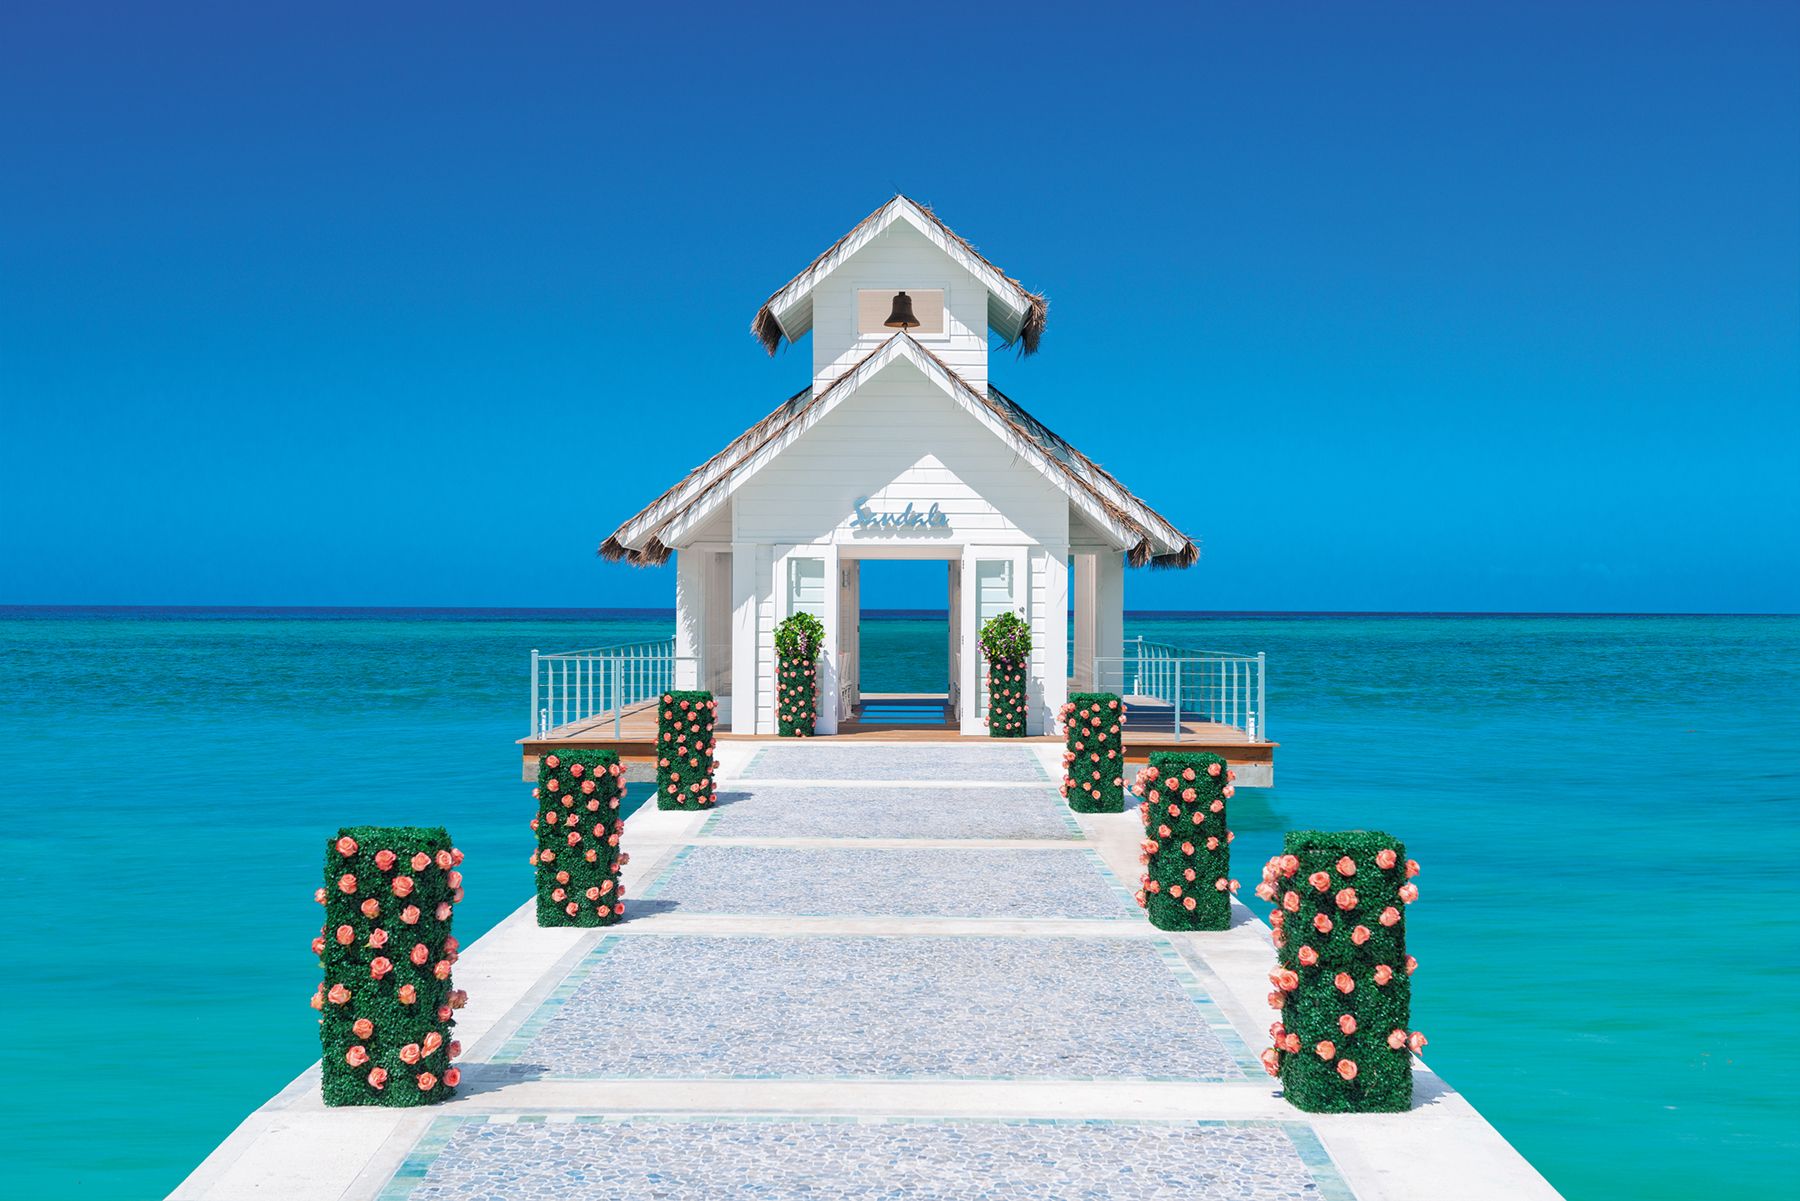 Sandals Montego Bay Over The Water Chapel Entrance